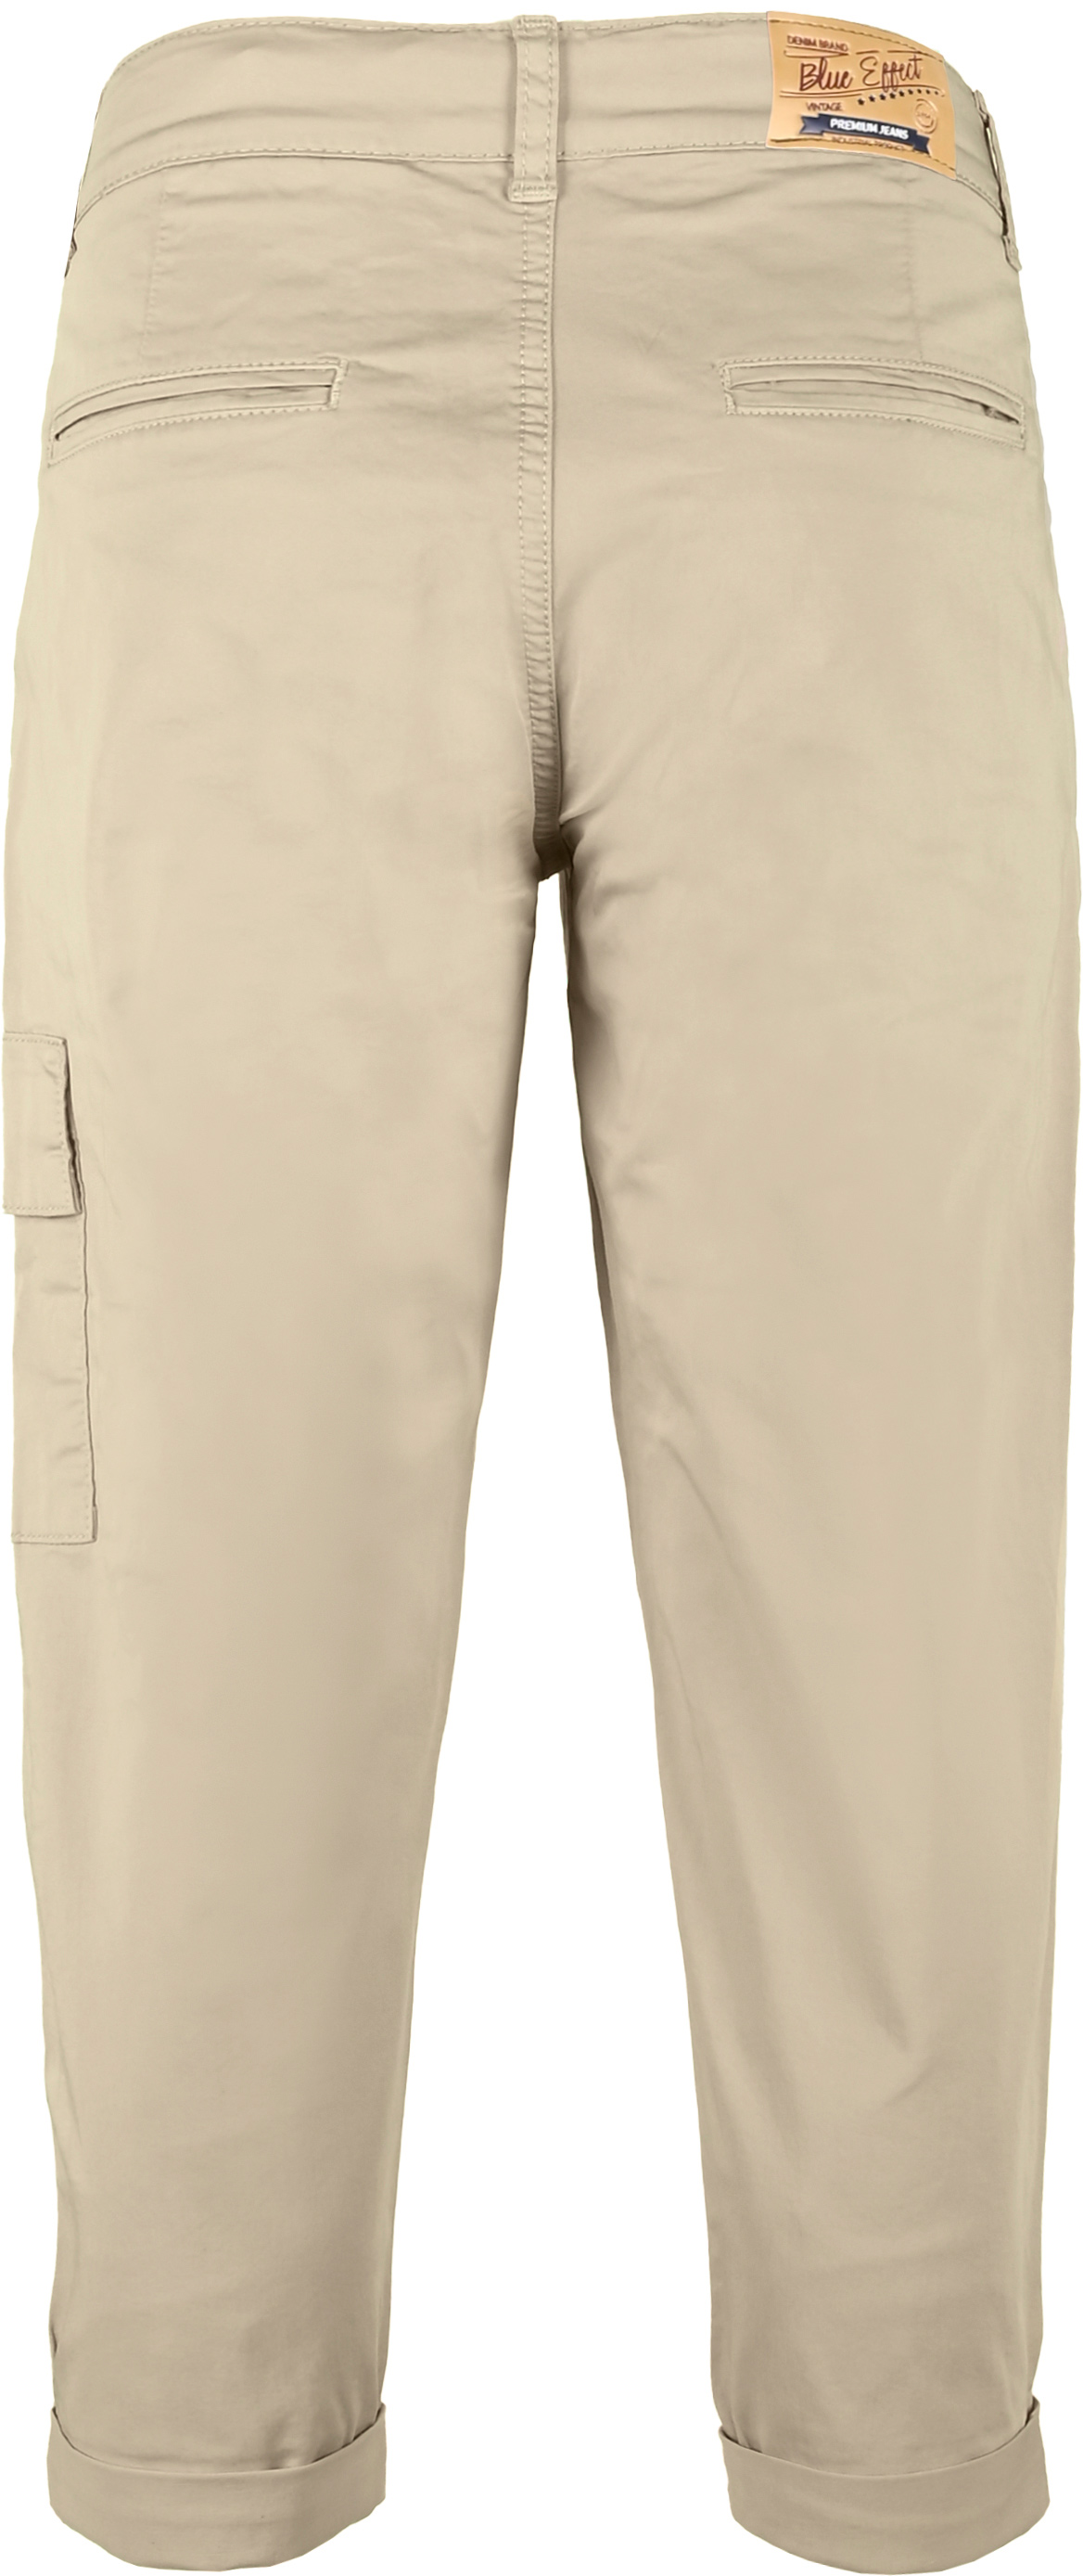 2828-Boys Wide Leg Cargo Pant Cropped, available in Normal